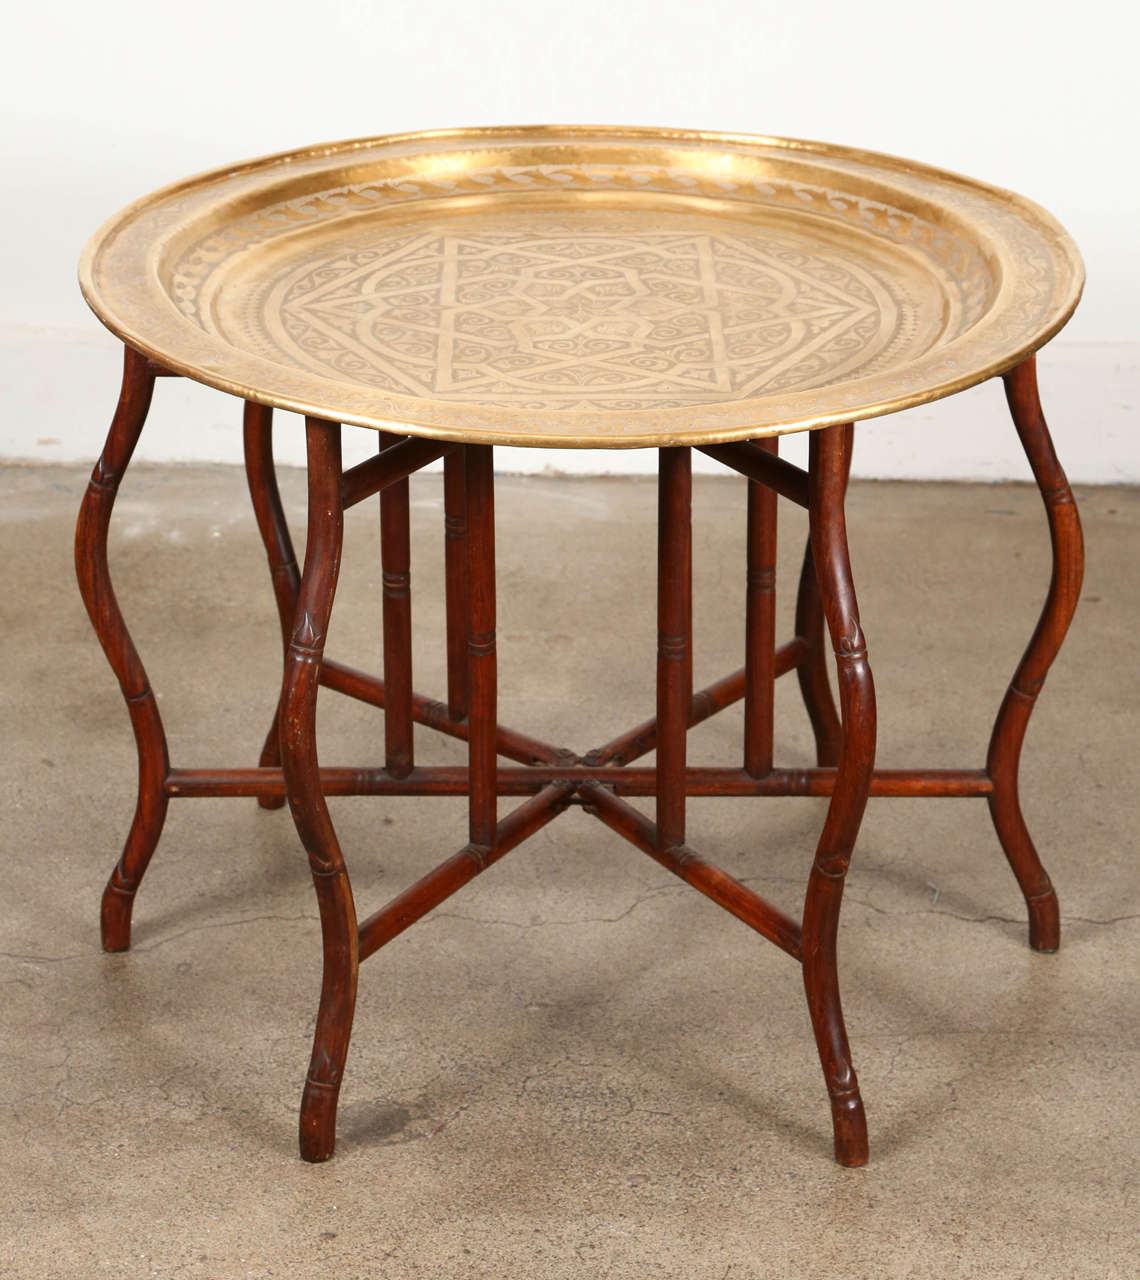 Very hard to find large Persian polished gold brass tray table on bamboo folding base, could be use as a coffee table or low dining table, this is how they use them in Morocco, Syria, India, Egypt and in the Middle East to serve food or tea. Great